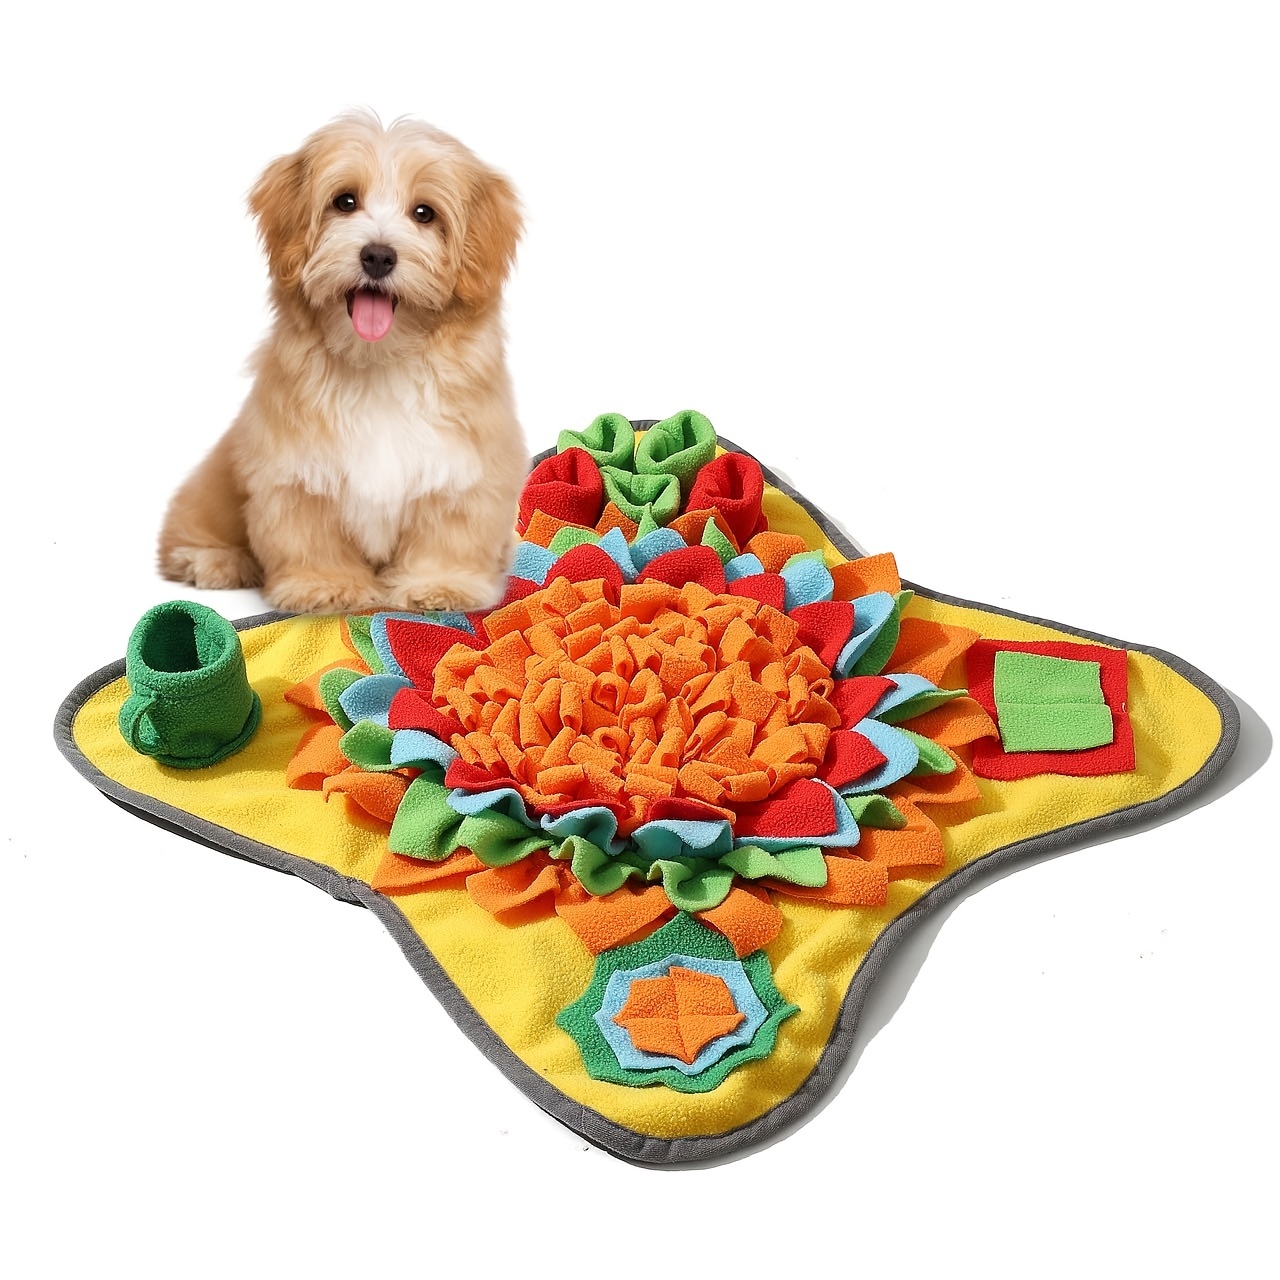 Interactive Dog Toys Snuffle Mat for Dogs, Chips Dog Snuffle Toy Treat Puzzle Toys, Large Dog Enrichment Toys Crinkly Squeaky Hide & Seek Toy for